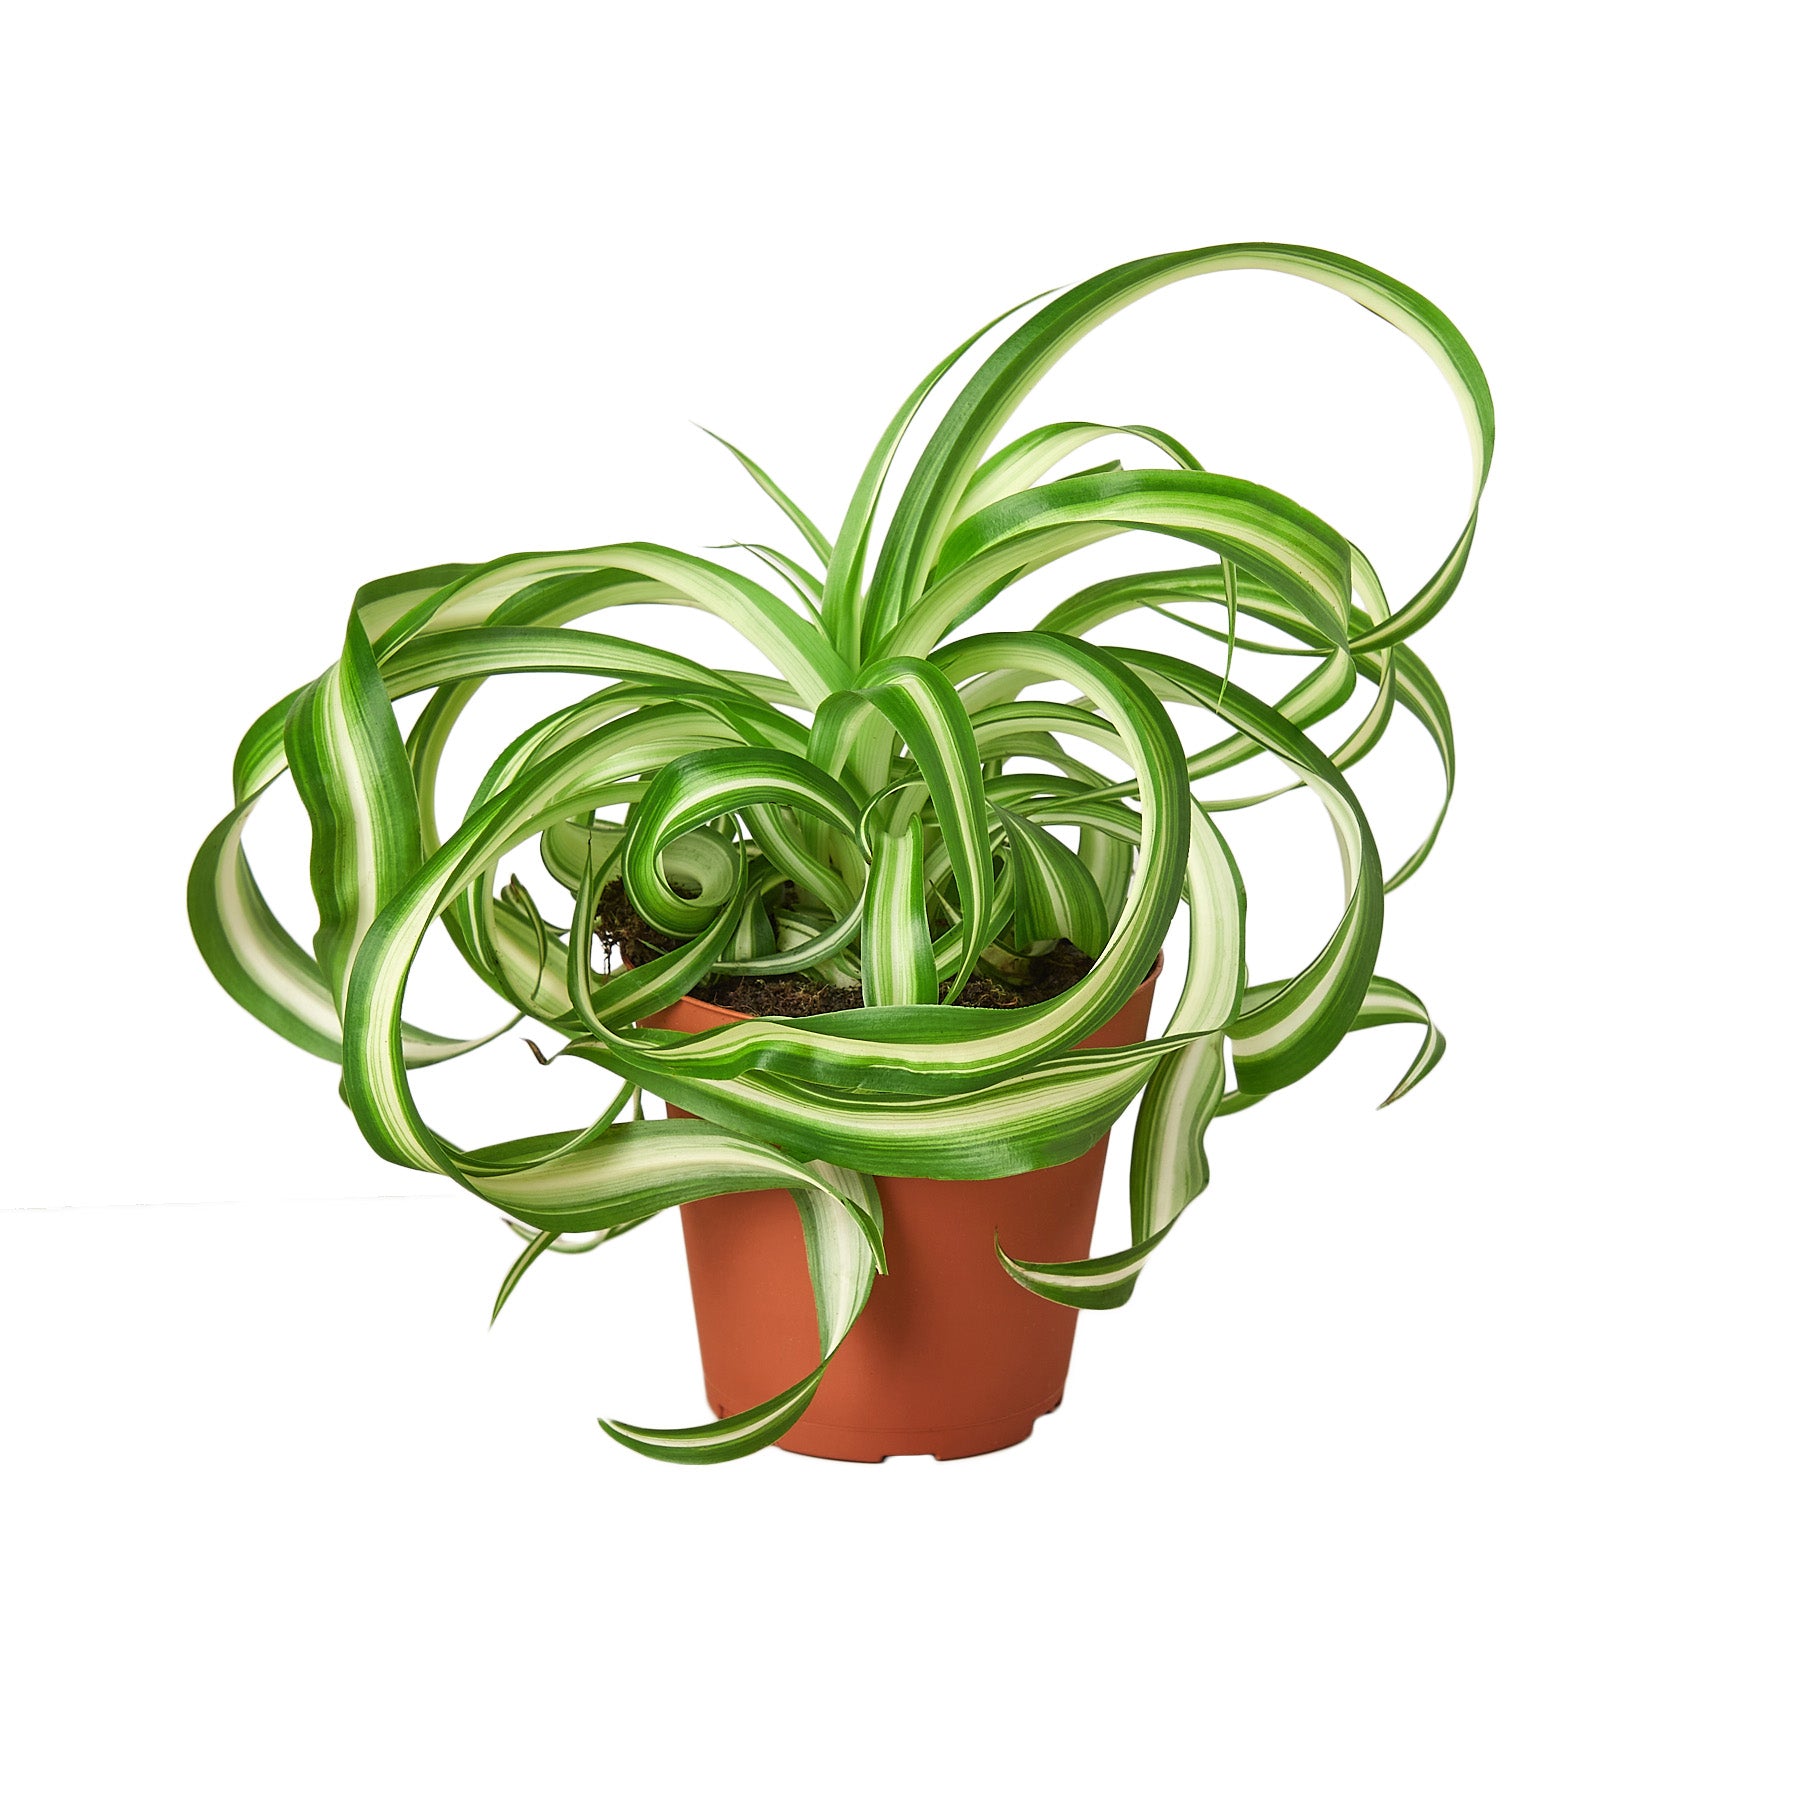 A plant nursery's green plant in a pot on a white background.